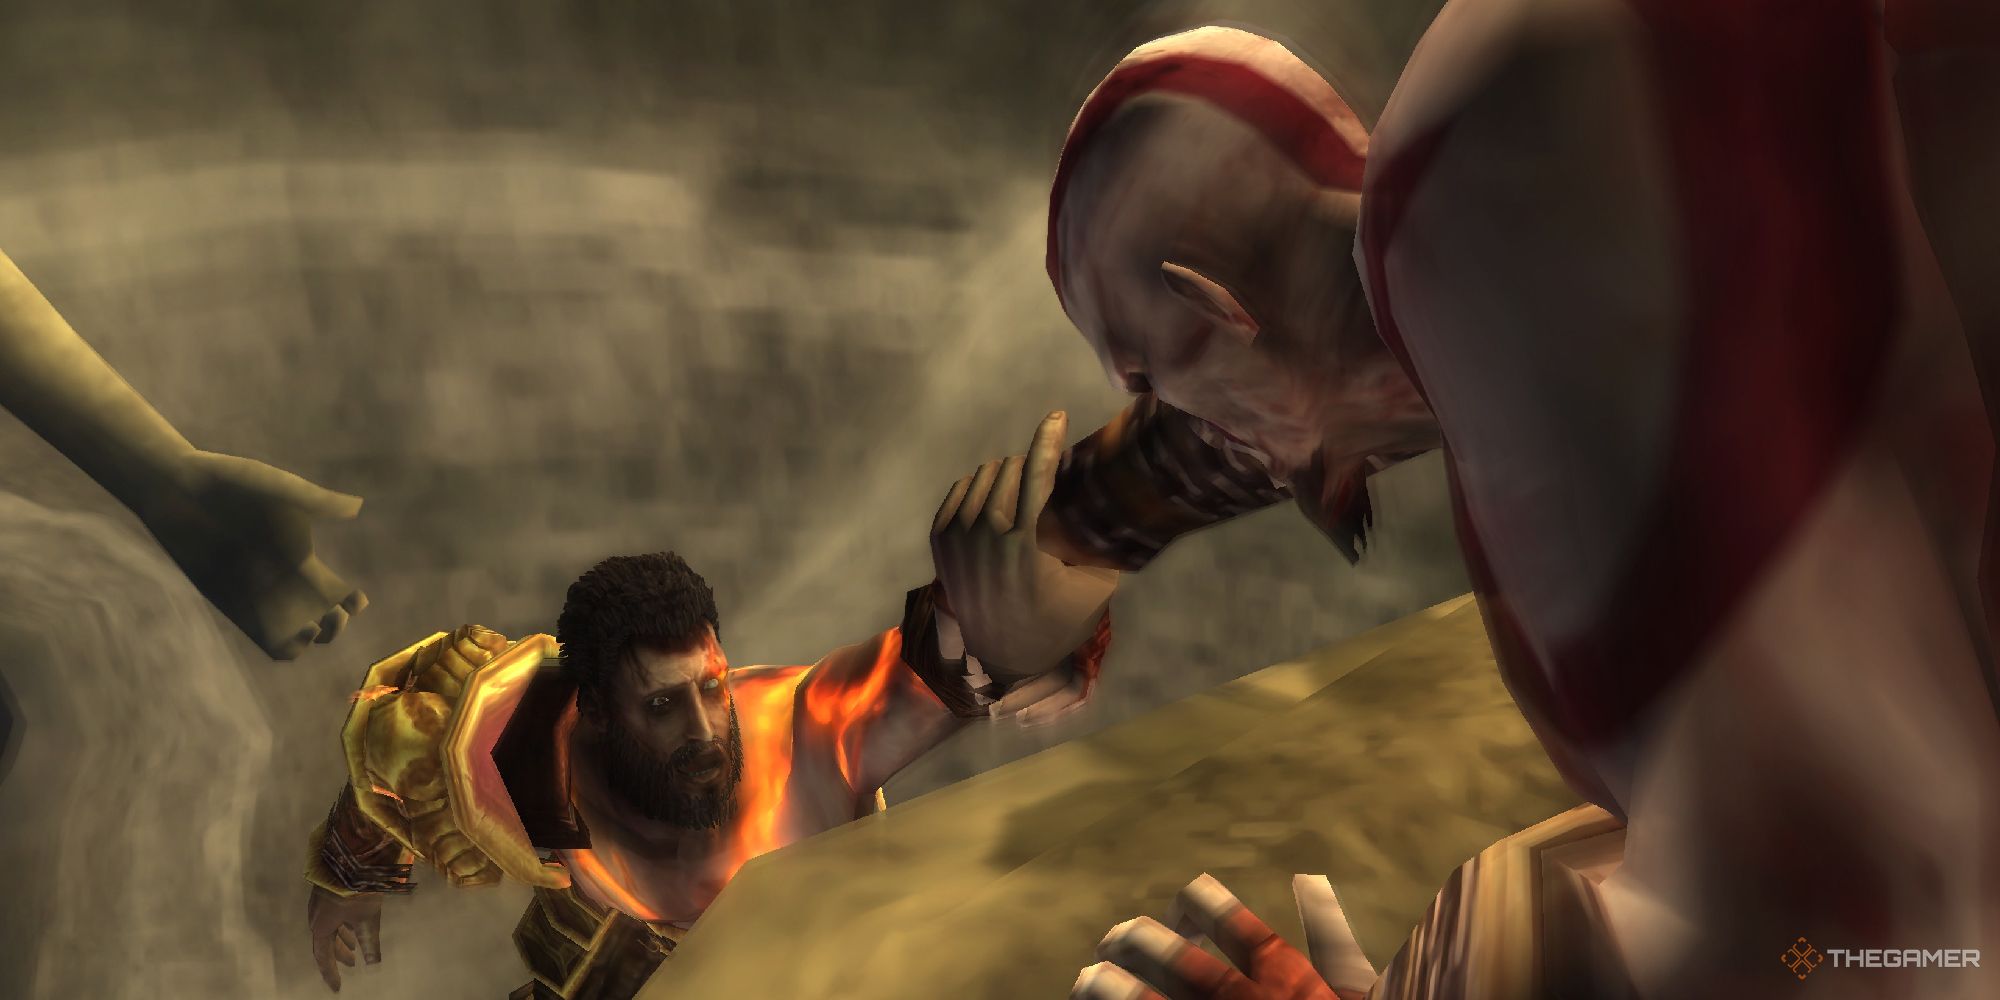 God of War: Ghost of Sparta